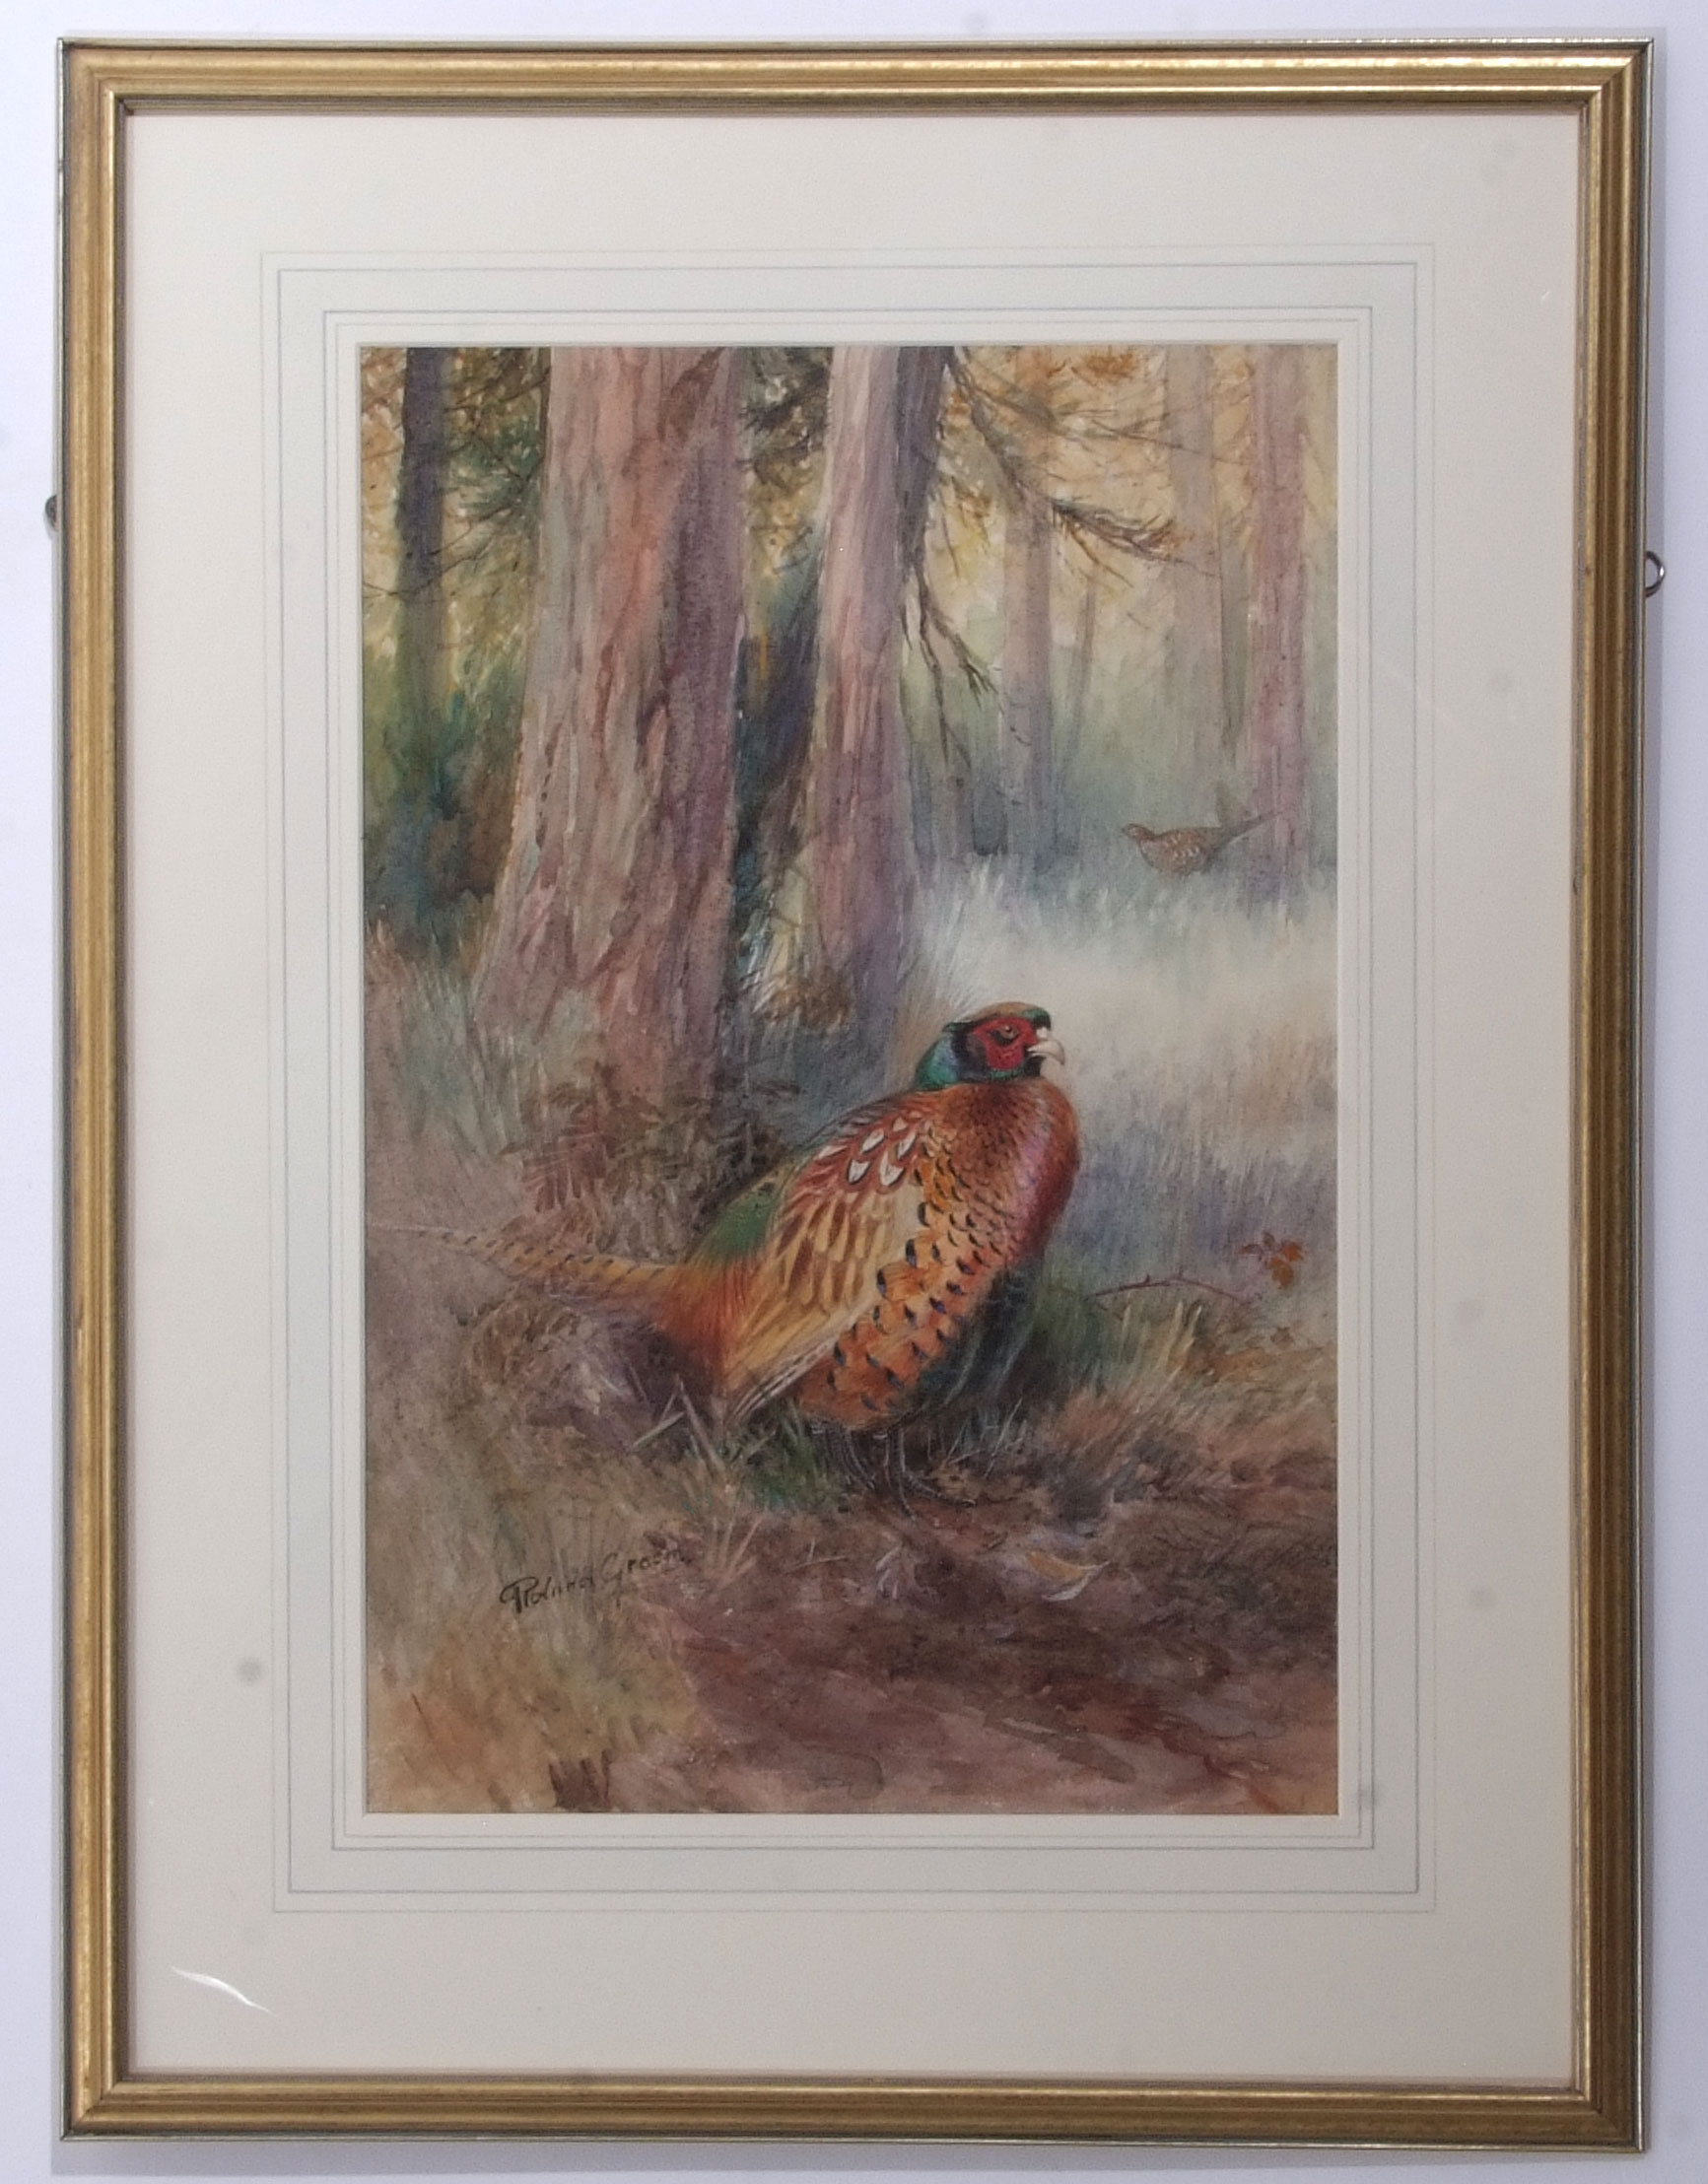 AR Roland Green (1896-1972), Pheasant in woodland, watercolour, signed lower left, 47 x 31cm - Image 2 of 2